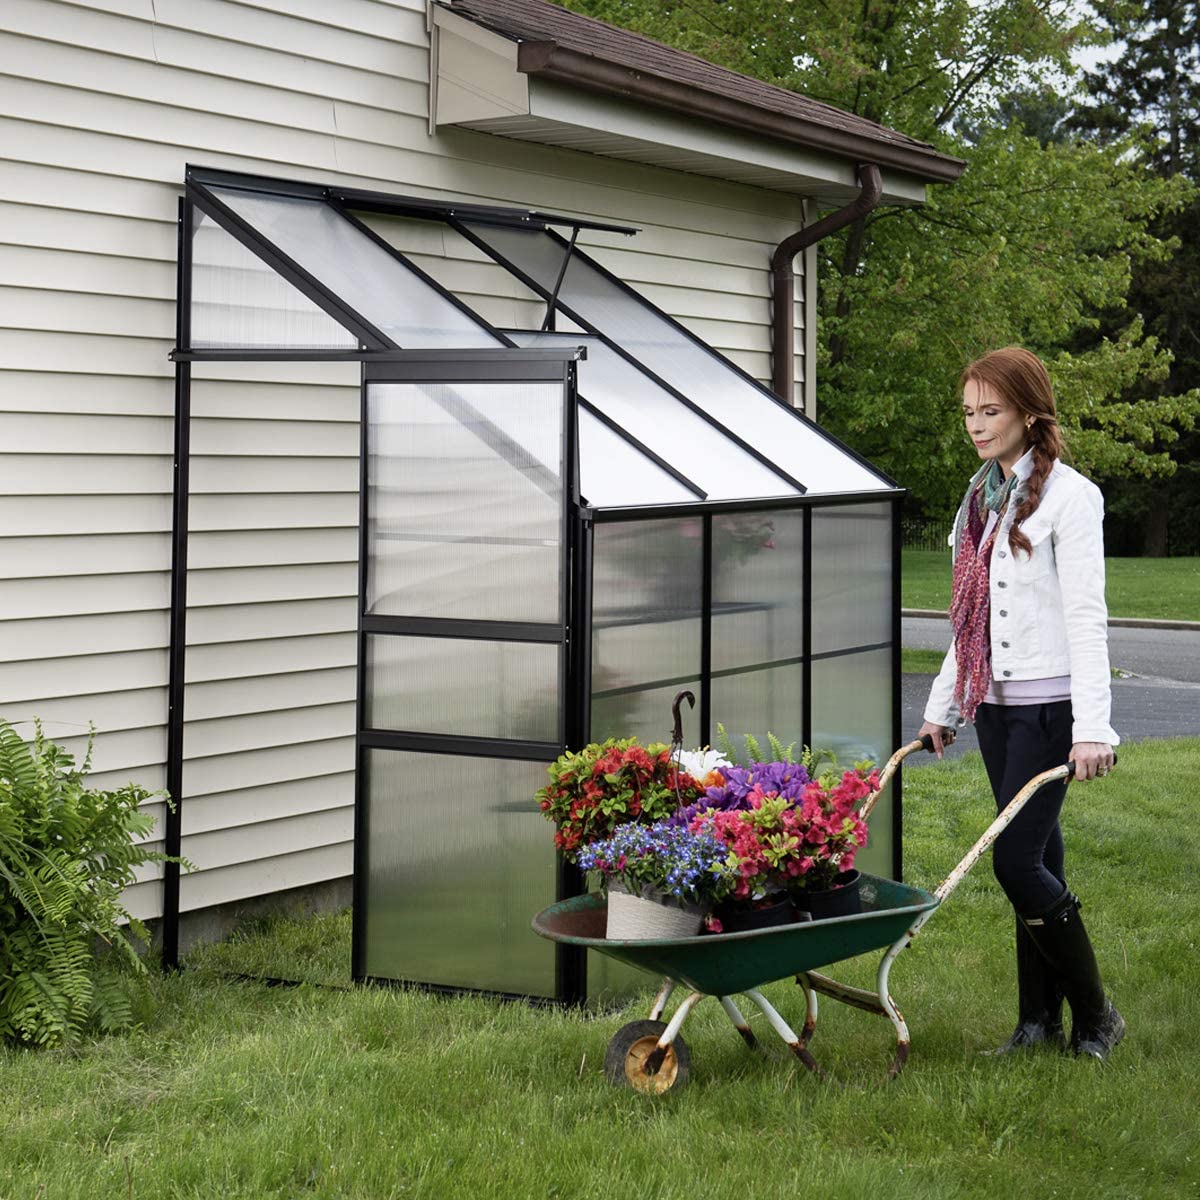 Mini Portable Clear Green Greenhouse Shelves Indoor Outdoor Patio Deck Sunroof 